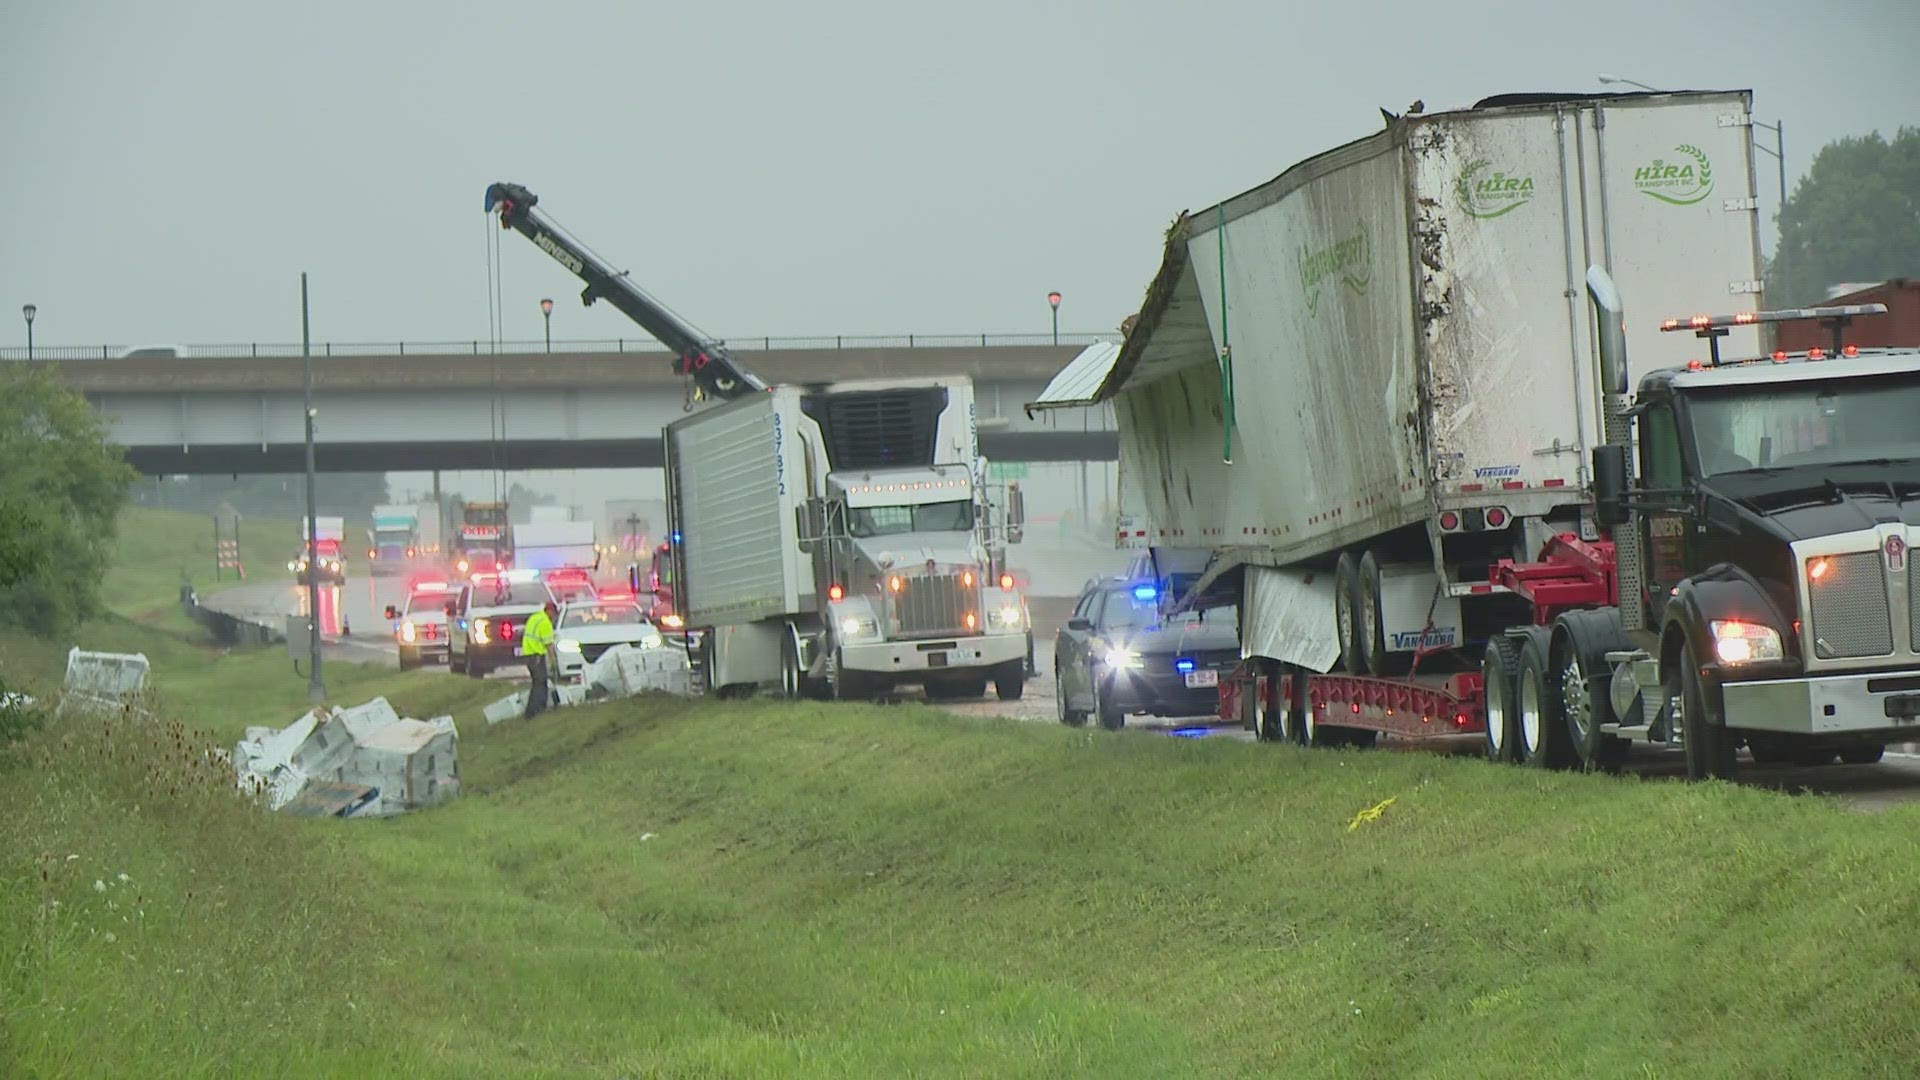 Two rollover crashes that involved tractor-trailers caused traffic issues in the St. Louis area Wednesday morning. Both crashes have been cleared.